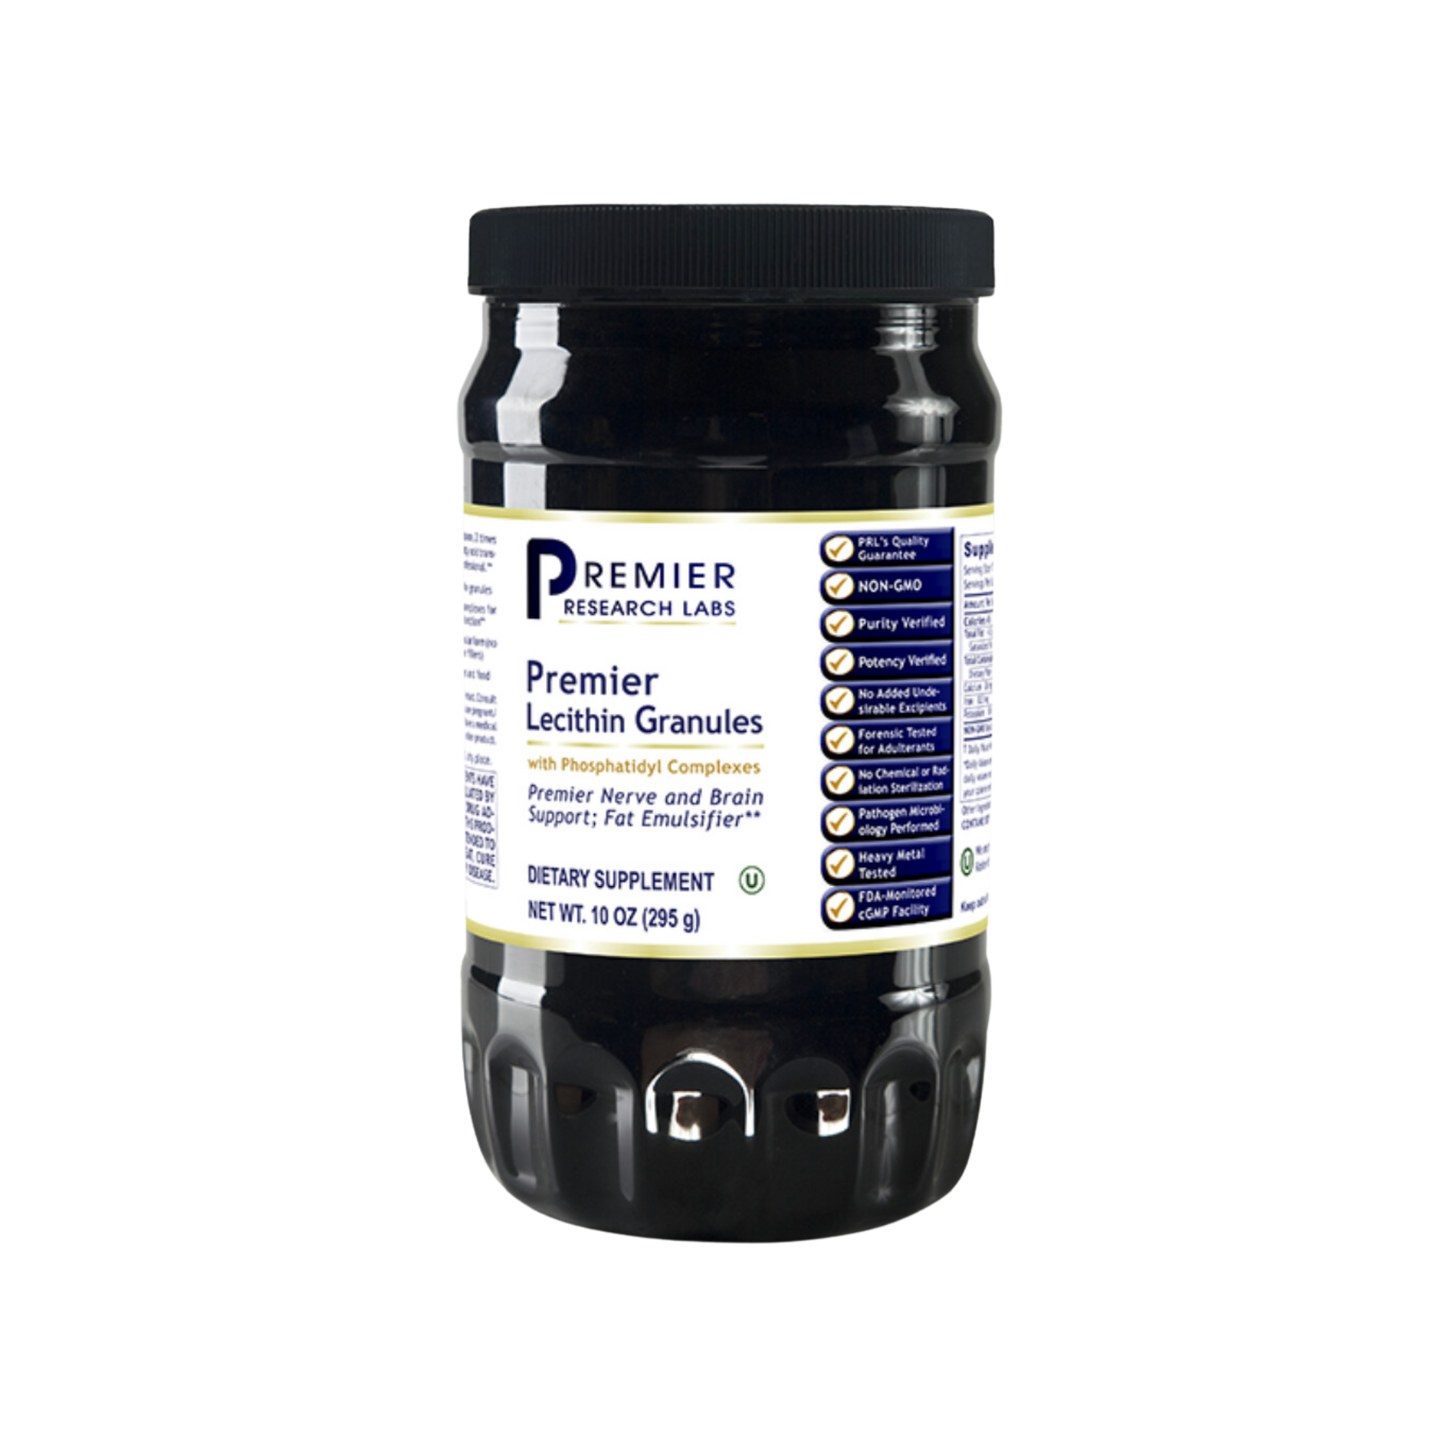 Premier Research Labs Lecithin Granules